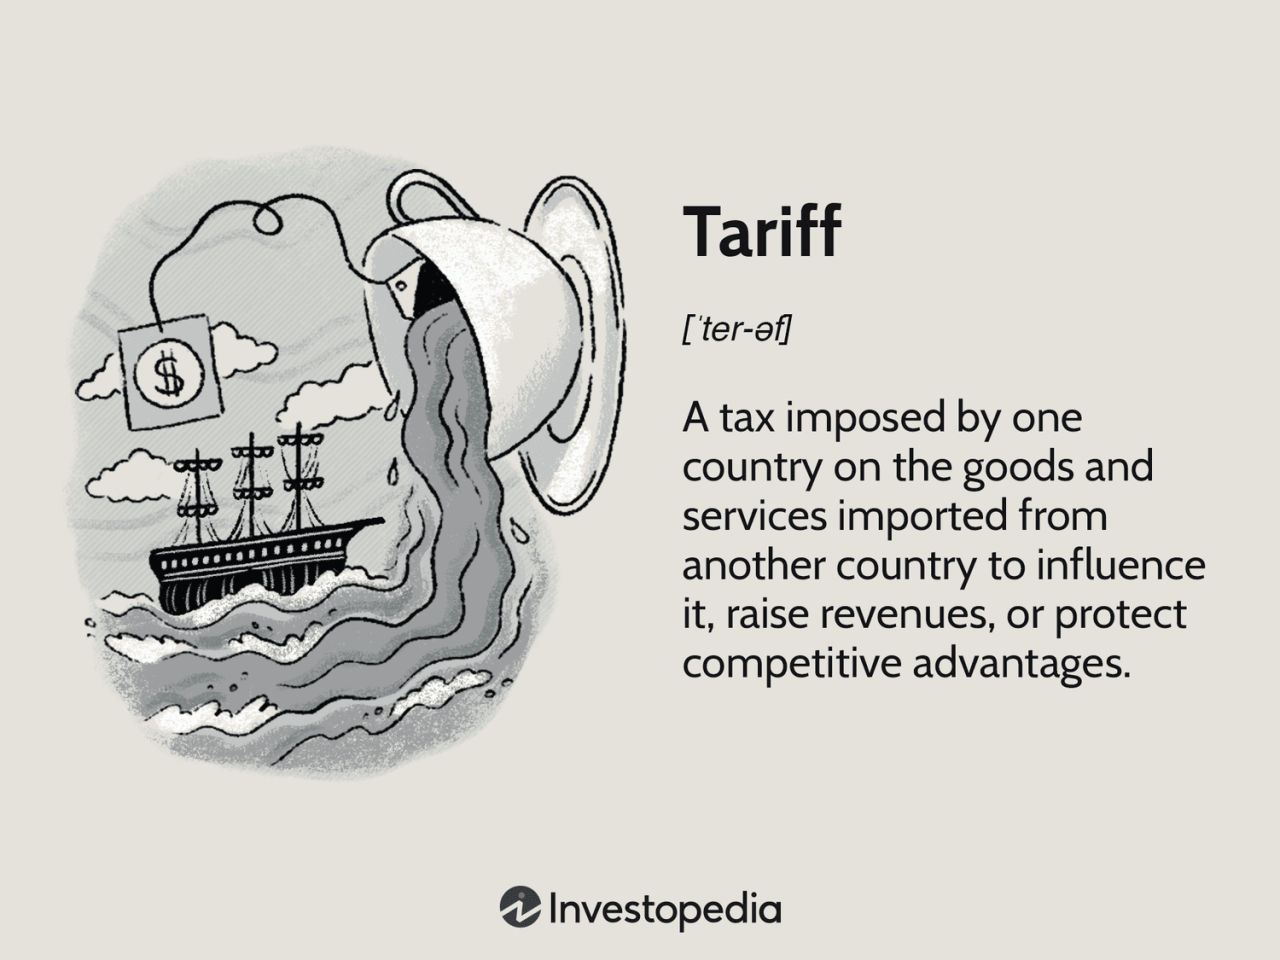 What Is A Tariff And Why Are They Important?